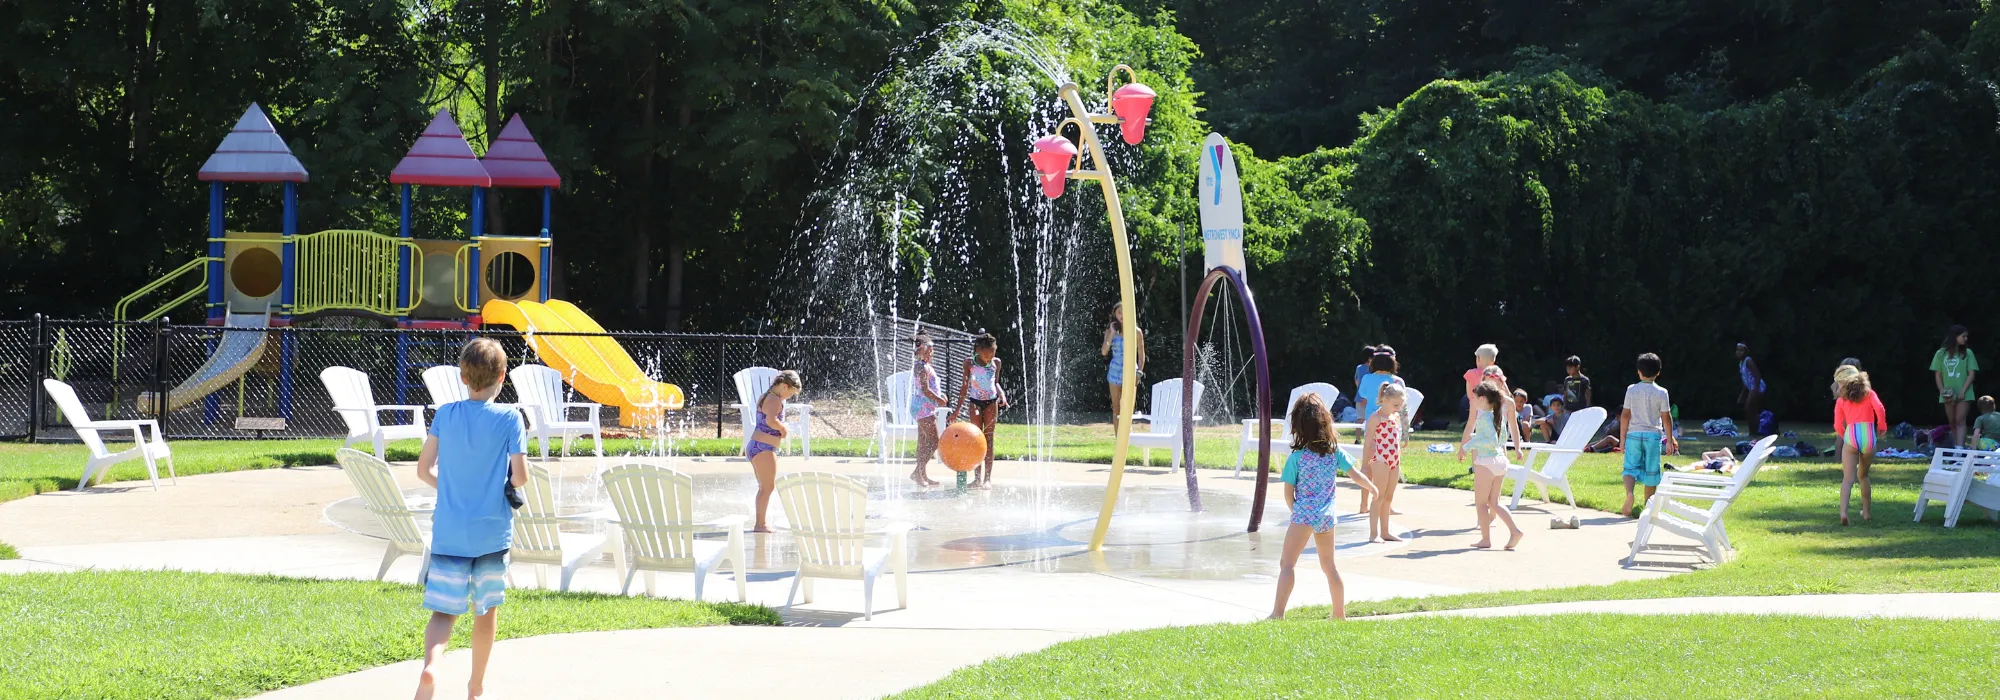 Kids playing in the splash pad at Clearbrook Swim club